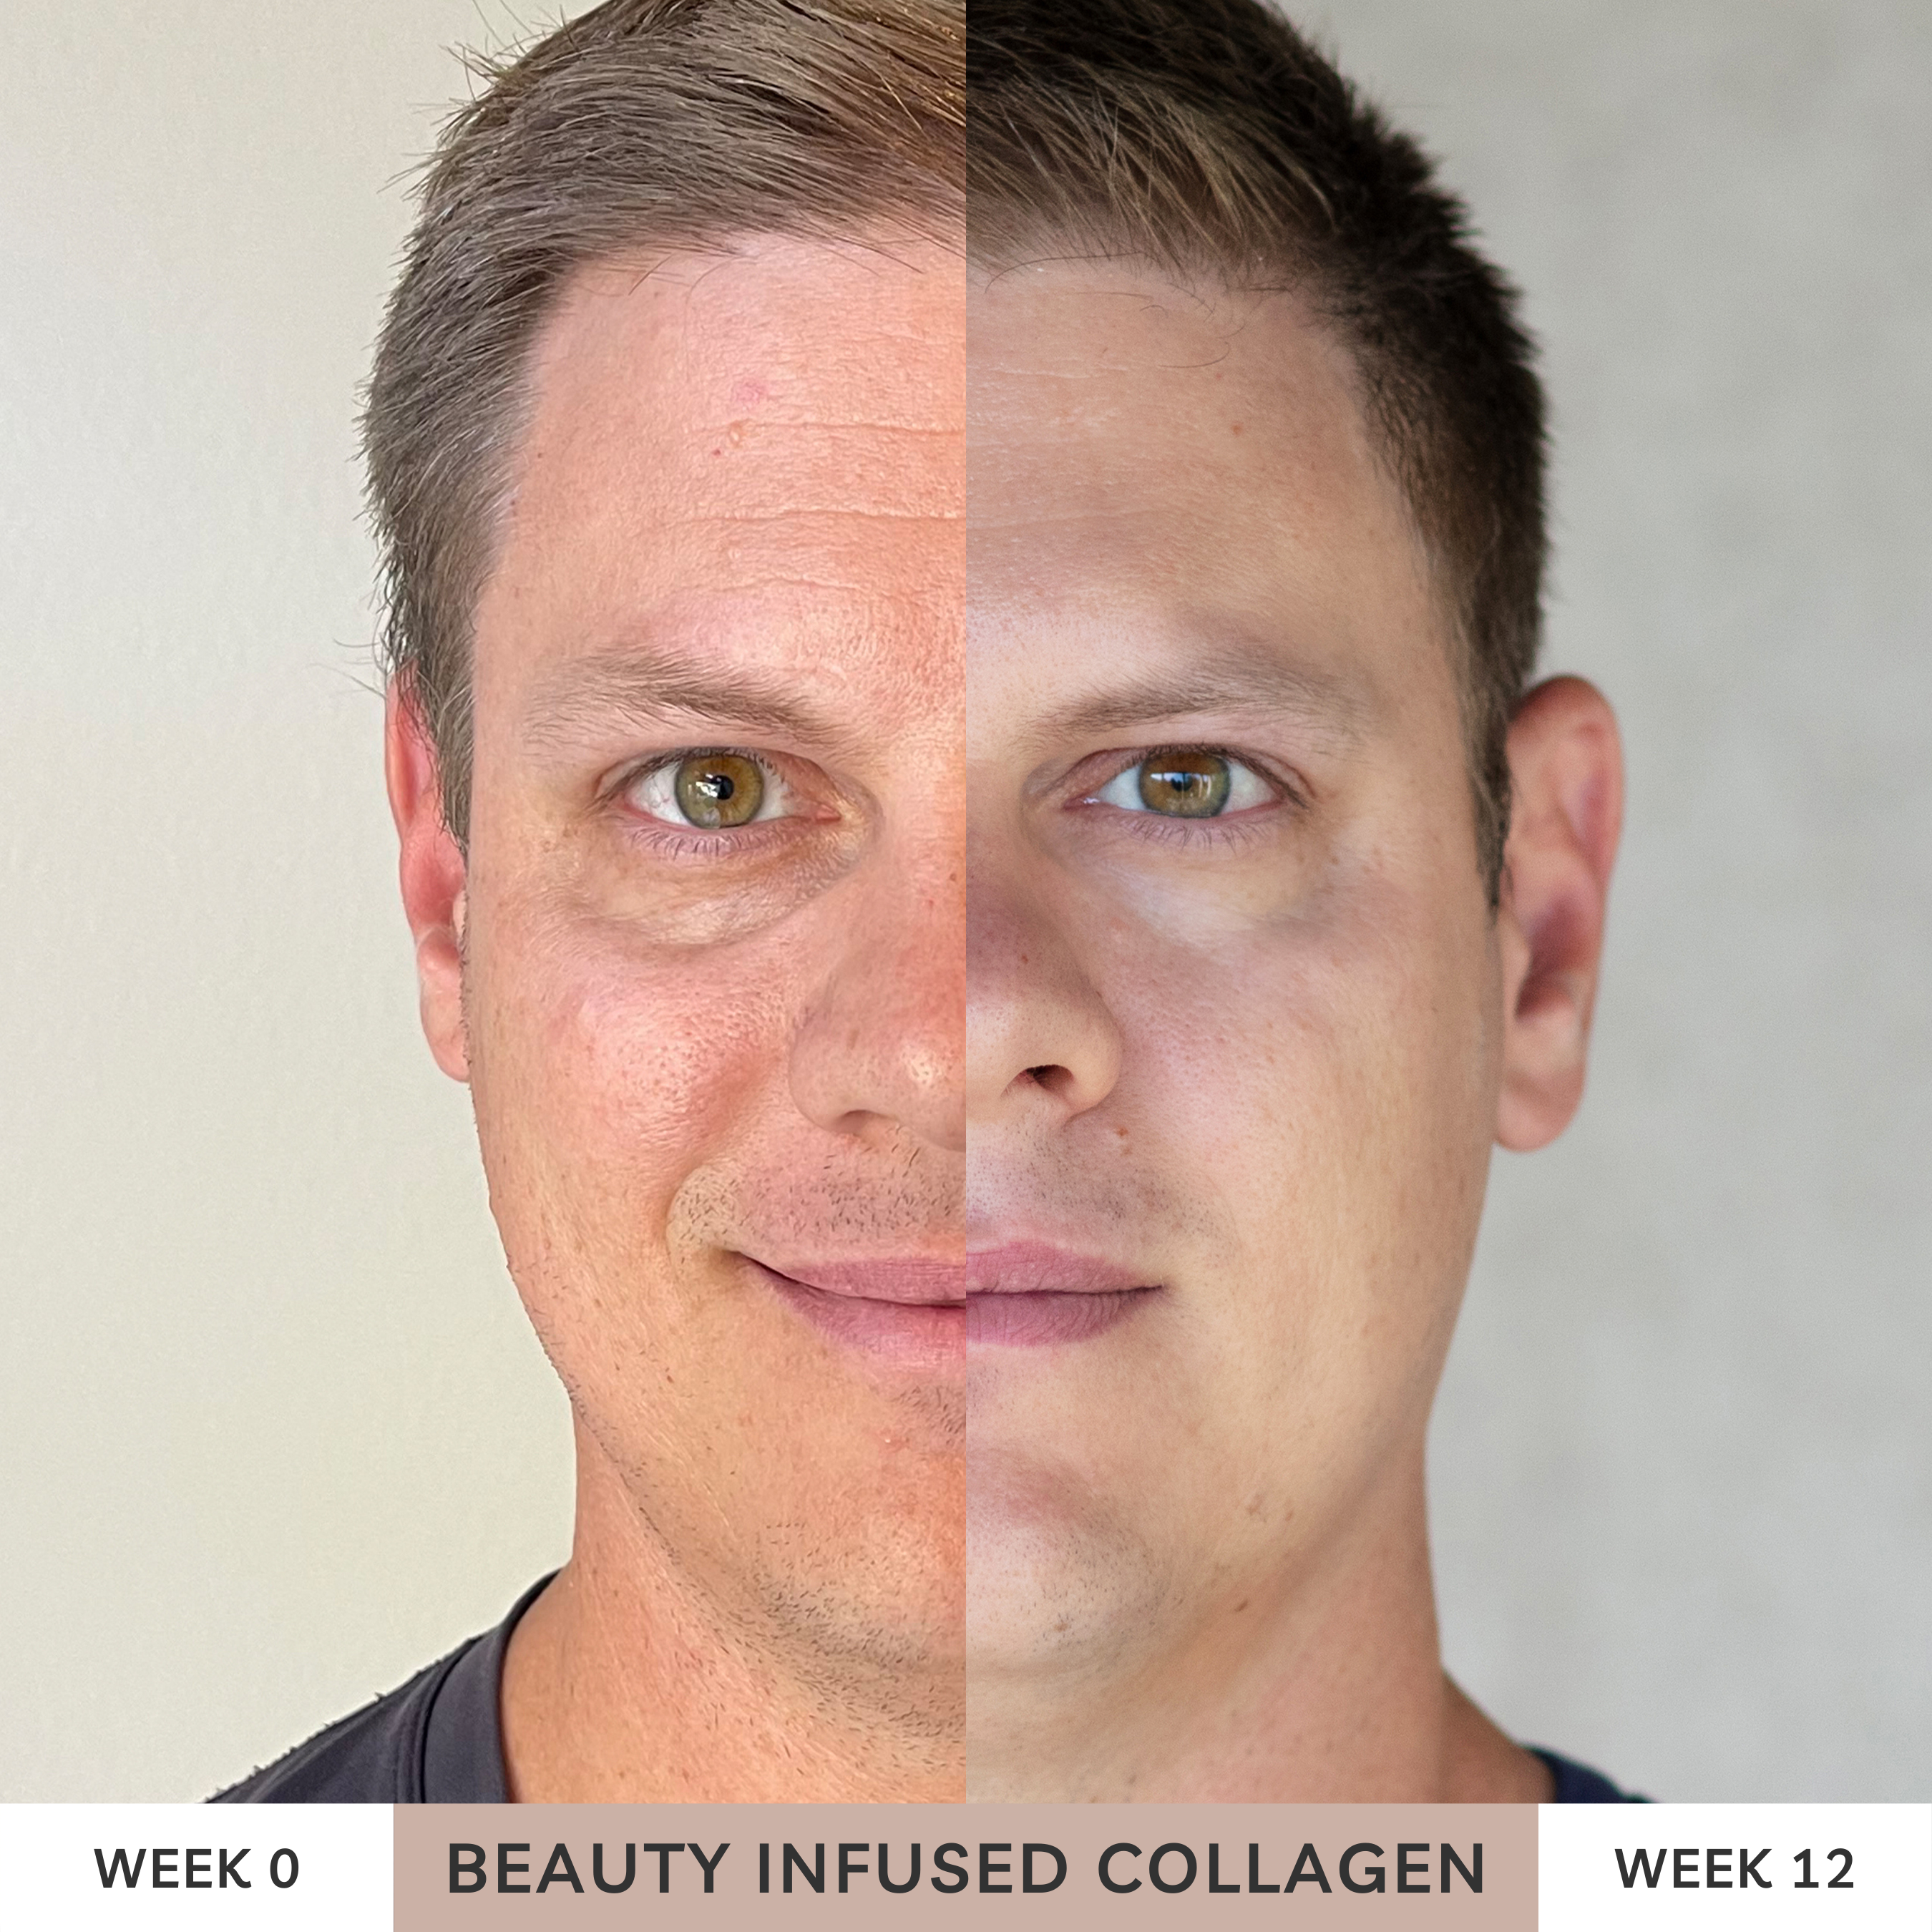 Real results for beauty infused collagen